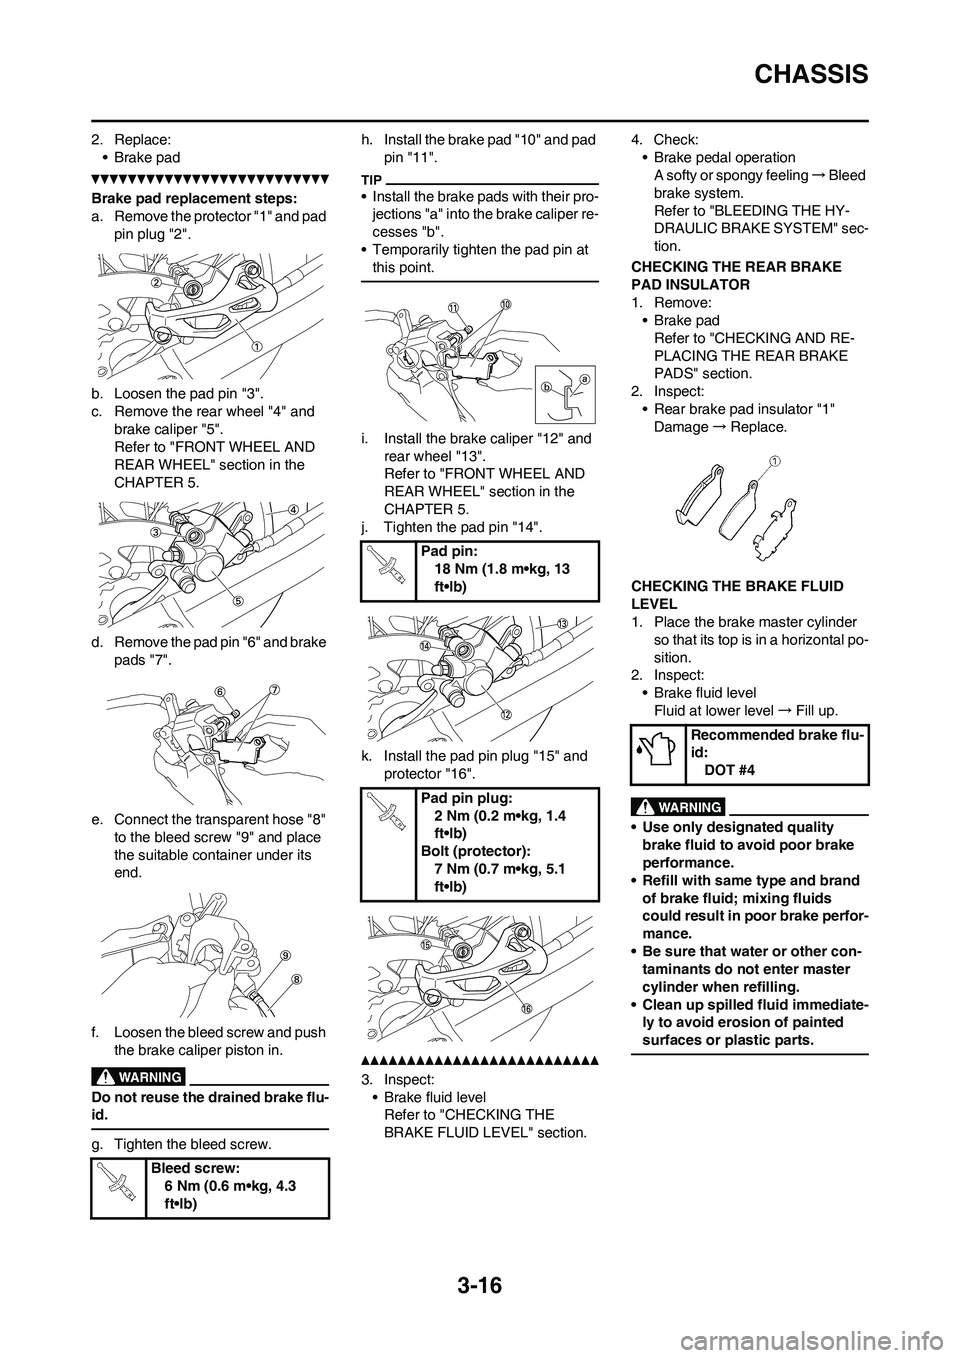 YAMAHA YZ450F 2010  Owners Manual 3-16
CHASSIS
2. Replace:
• Brake pad
Brake pad replacement steps:
a. Remove the protector "1" and pad 
pin plug "2".
b. Loosen the pad pin "3".
c. Remove the rear wheel "4" and 
brake caliper "5".
R